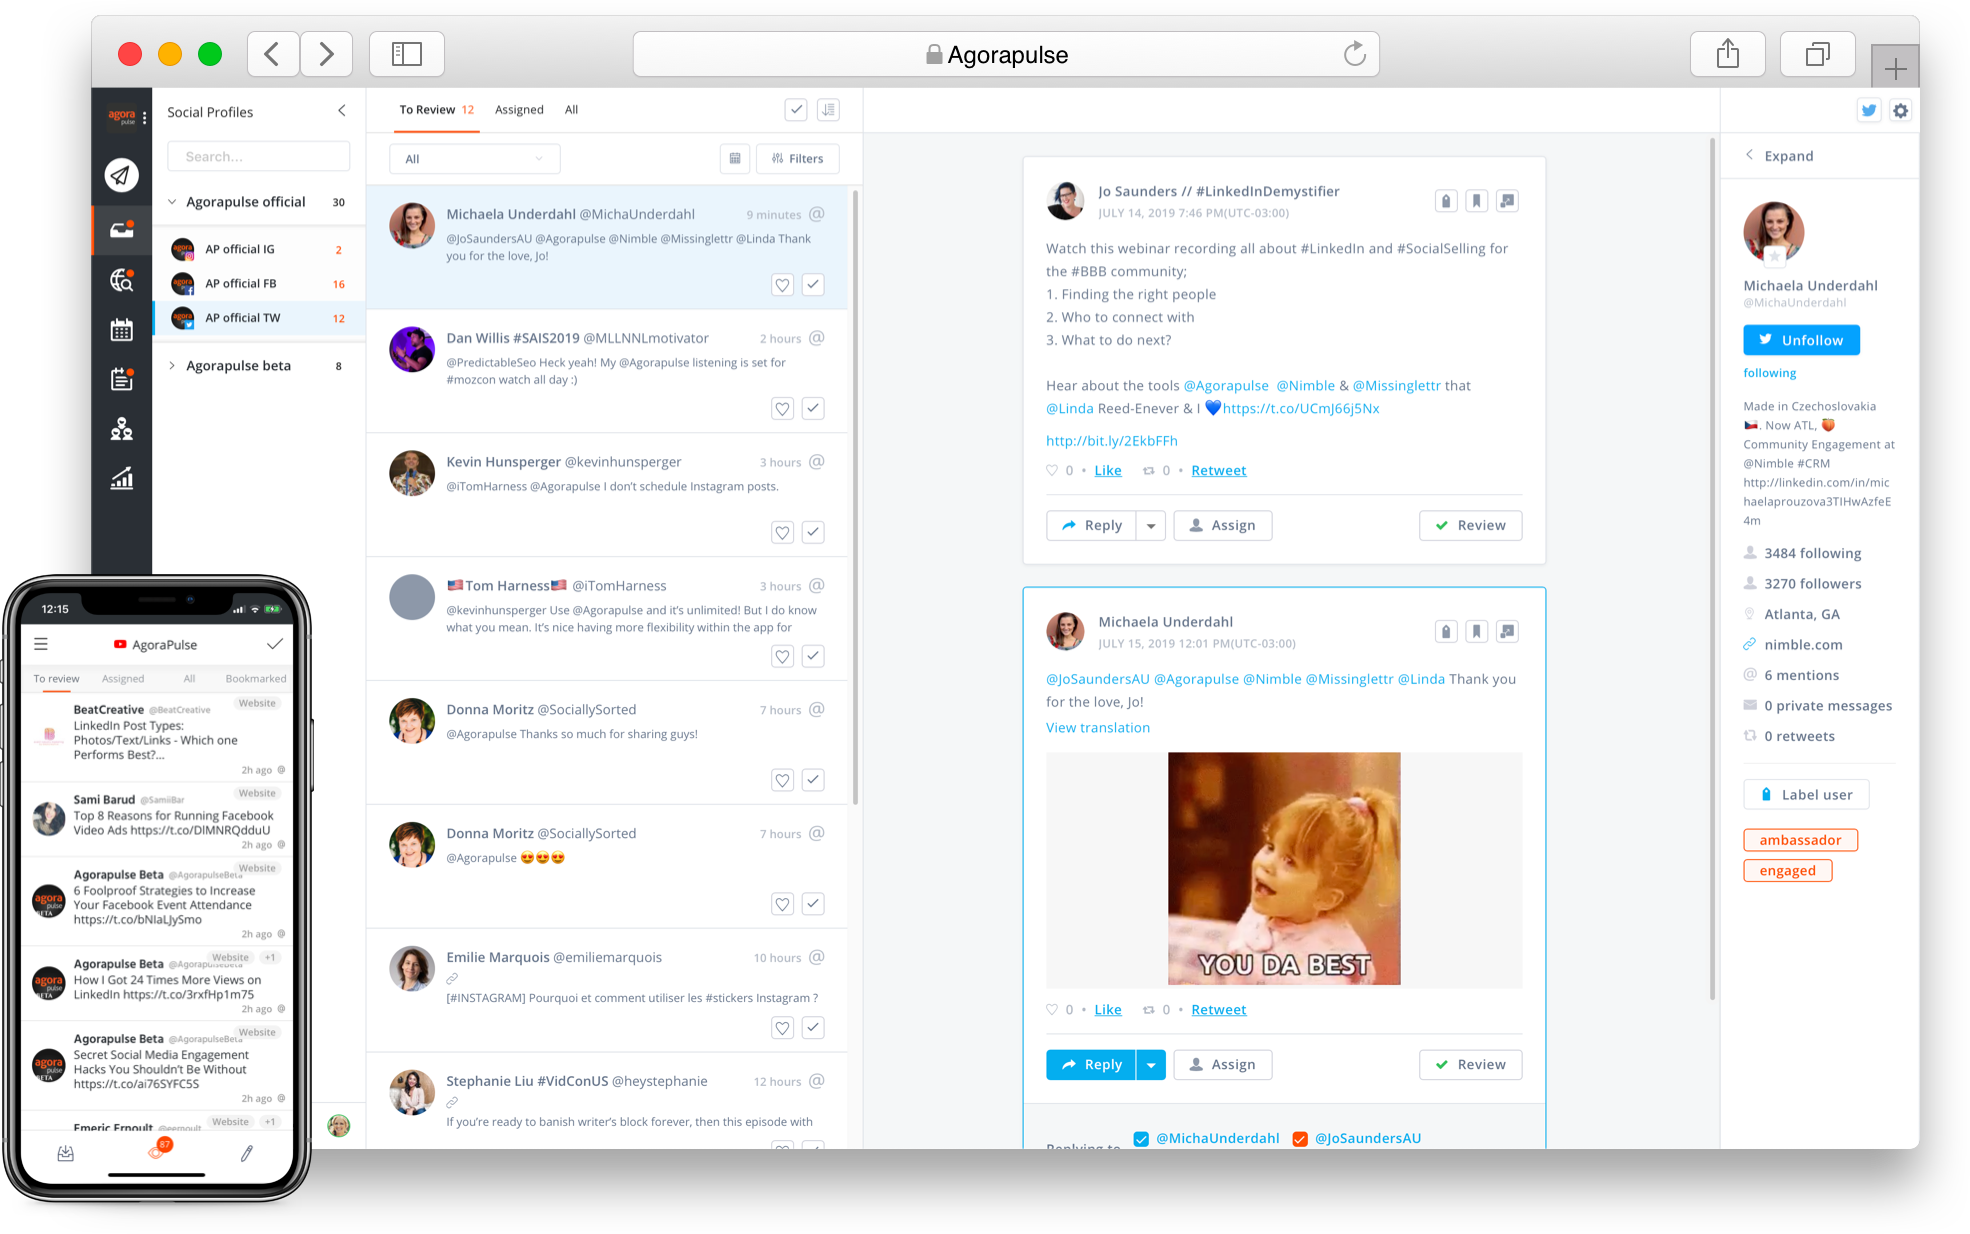 AgoraPulse Software - Easily respond to comments, ad comments, private/direct messages in our social media inbox. Easily translate inbox items, respond with a saved reply, label the message, or assign it to a team member.